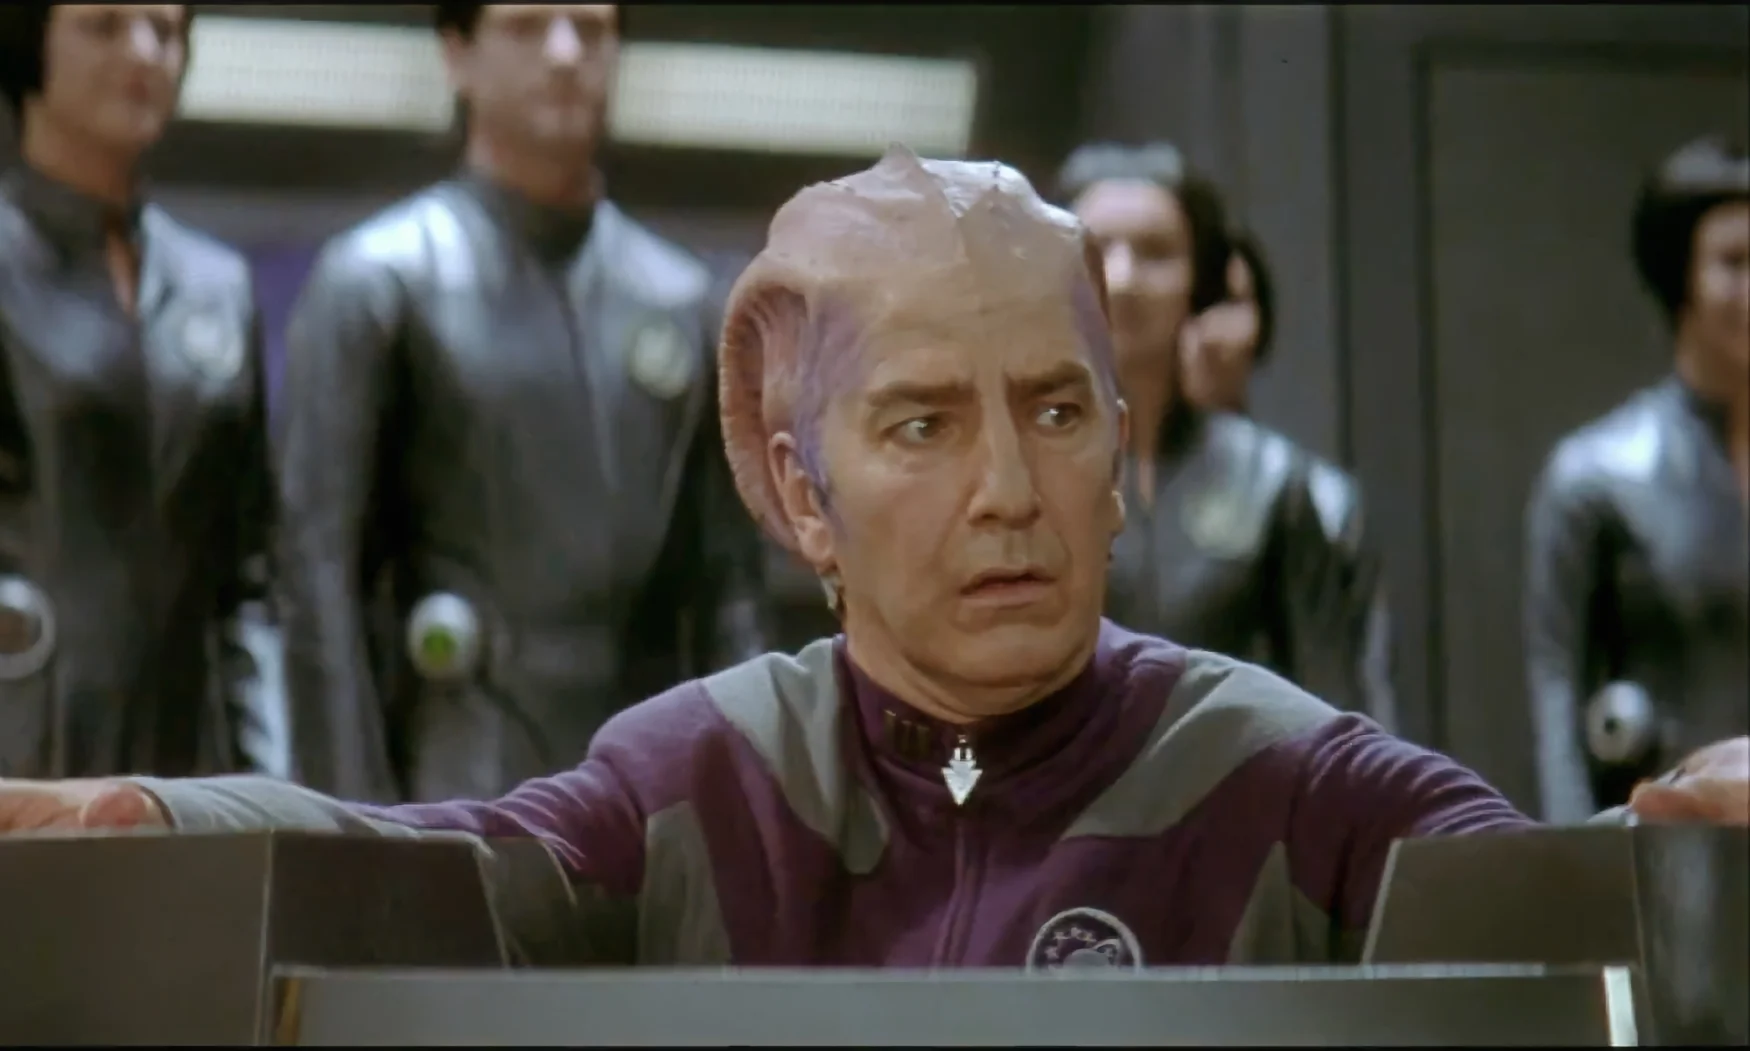 Still from the movie ‘Galaxy Quest’ (1999) featuring Alan Rickman in sci-fi makeup and costume.